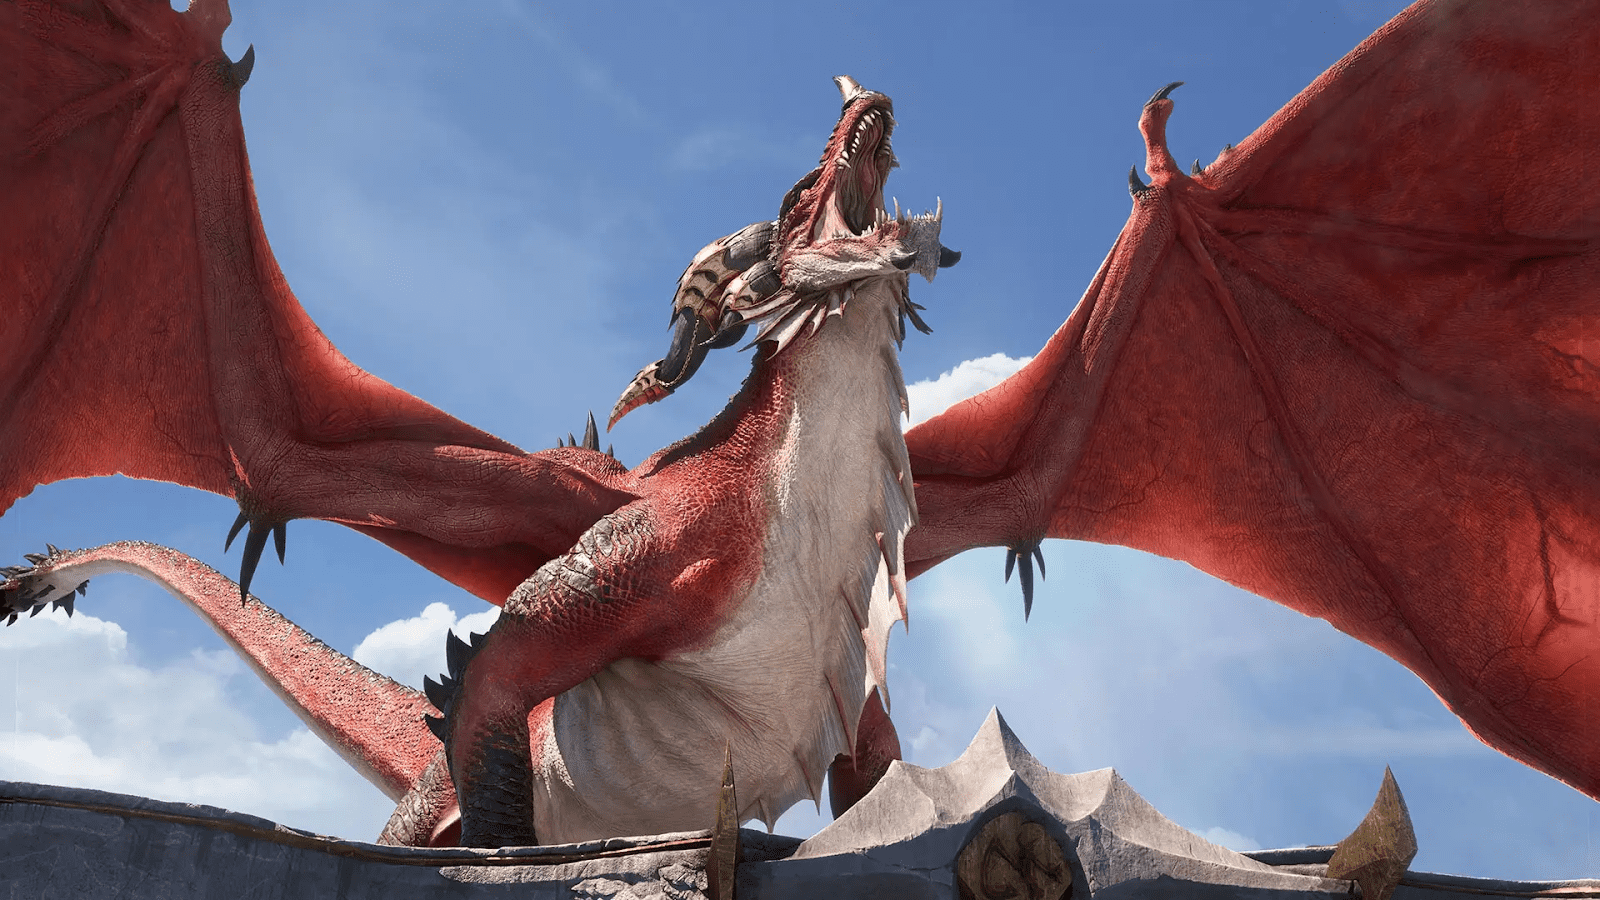 How To Download Dragonflight, Download Size and System Requirements